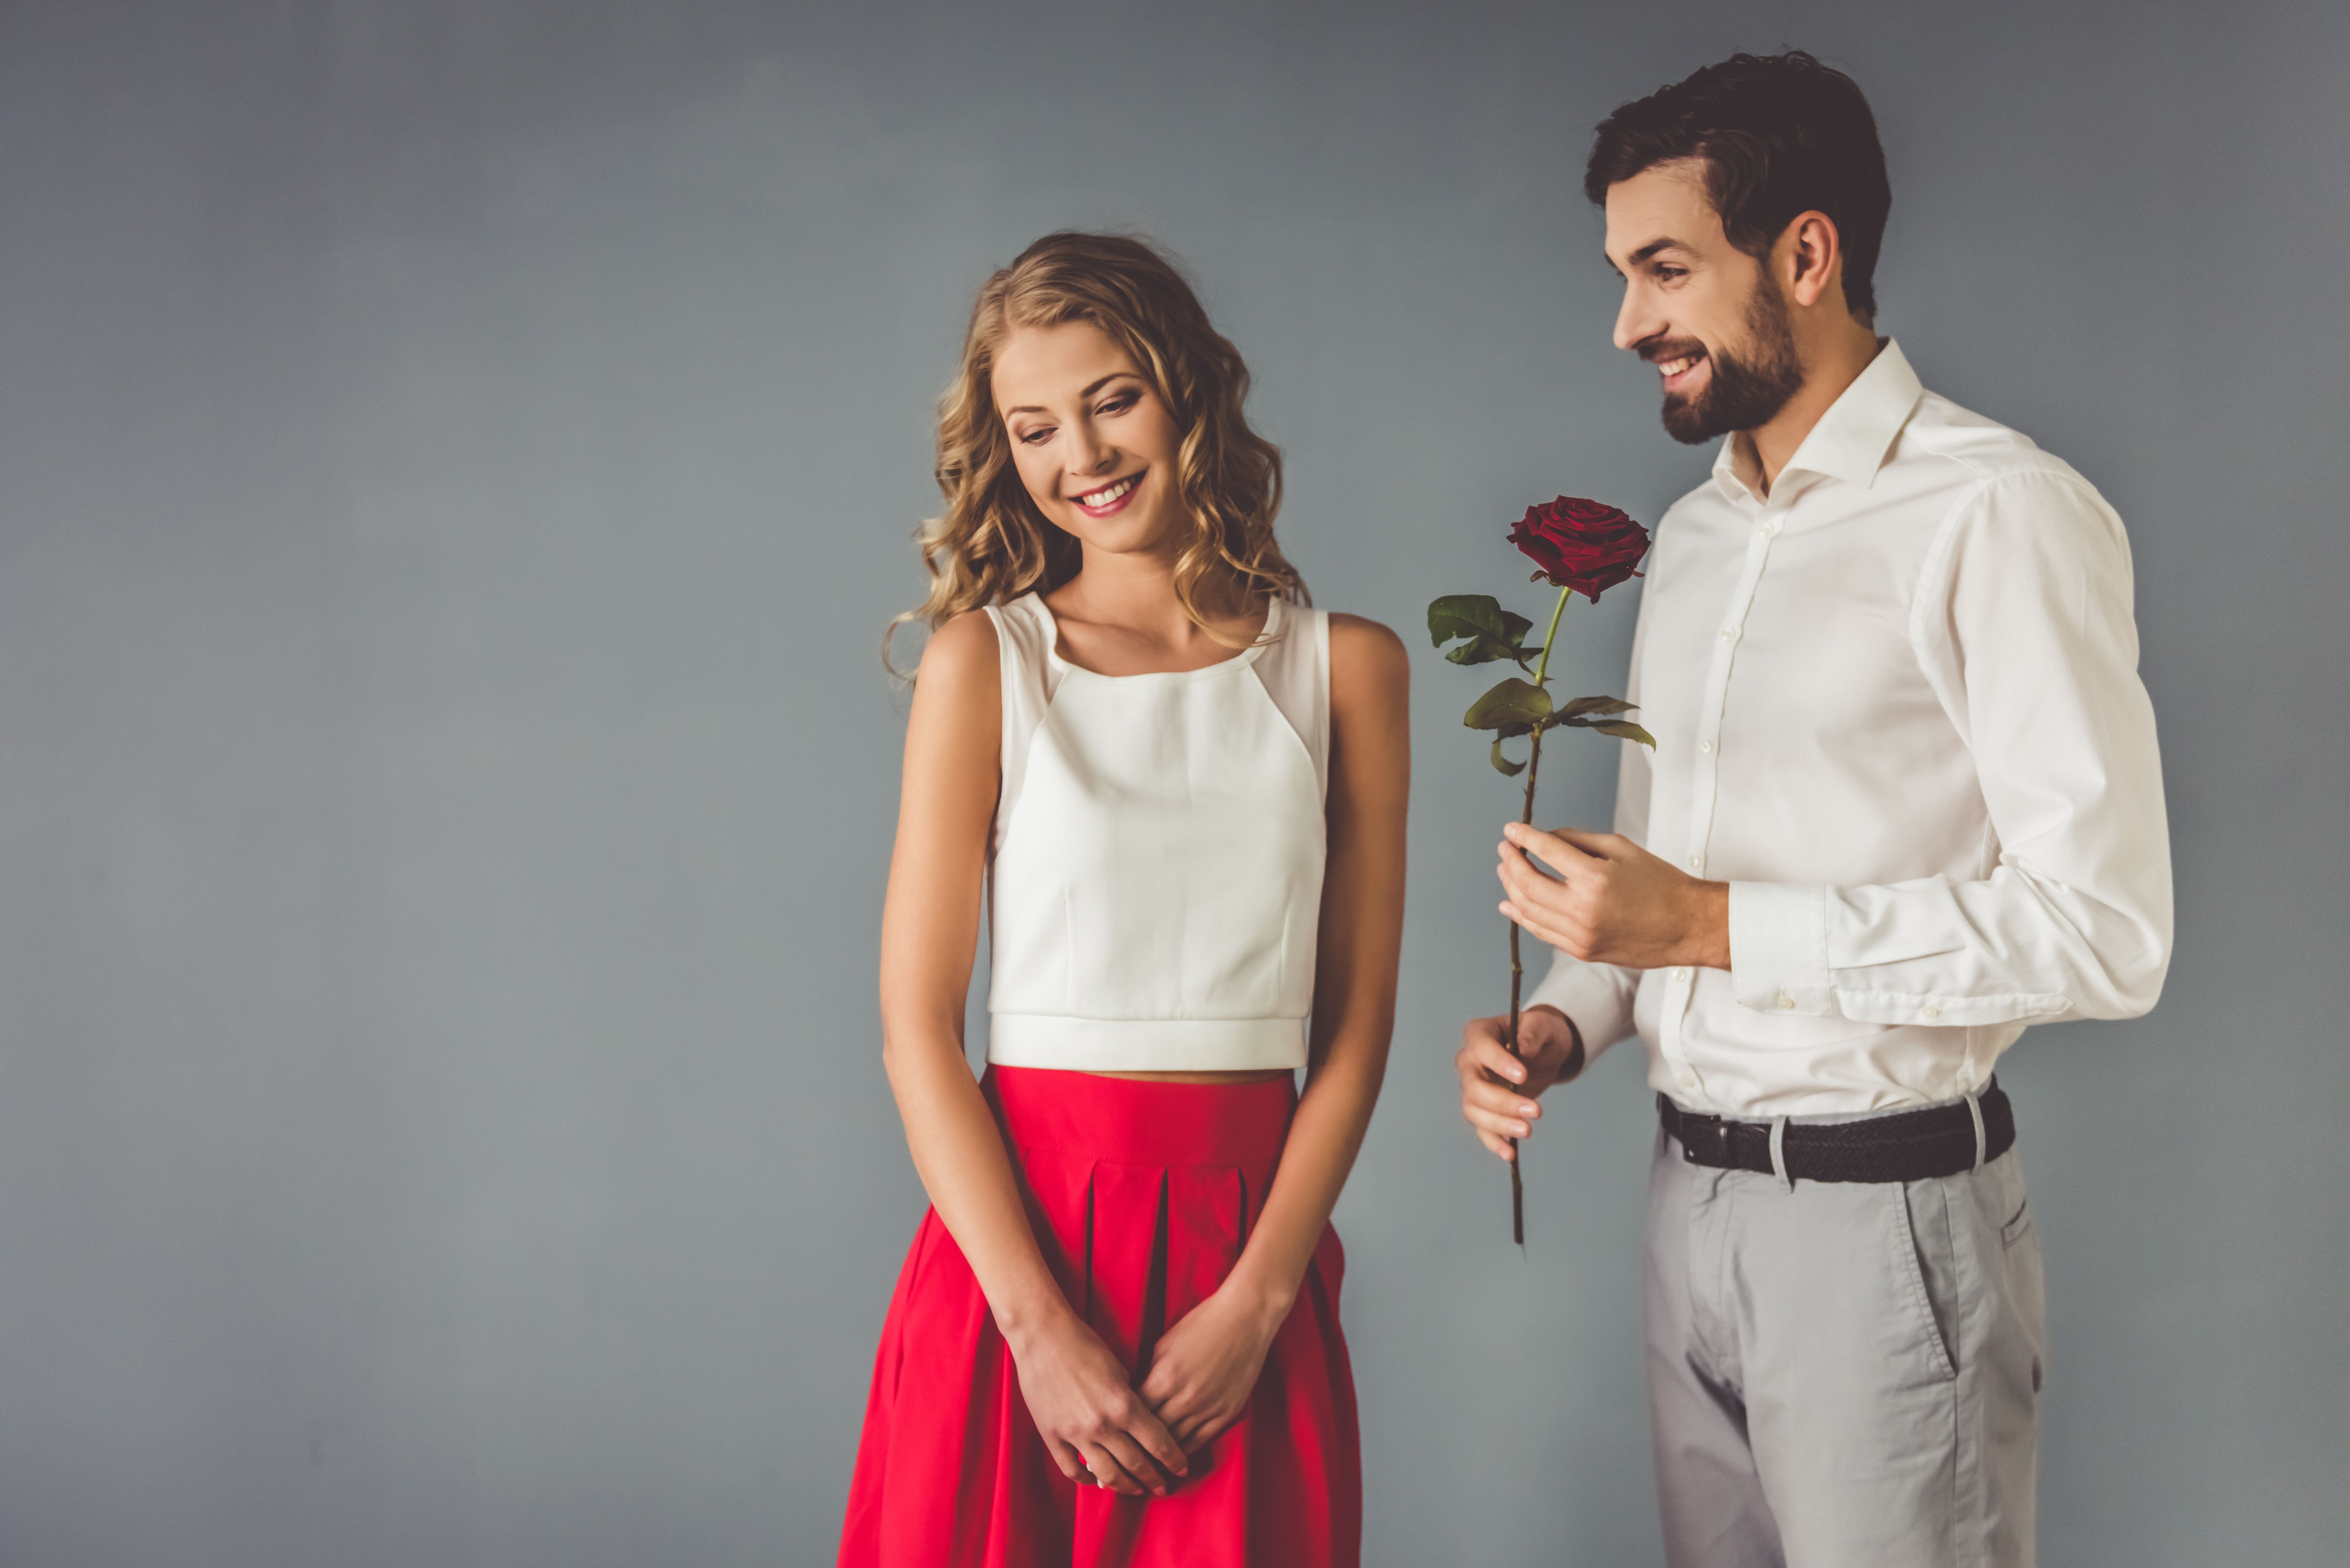 A man giving a woman red flowers. | Source: Shutterstock